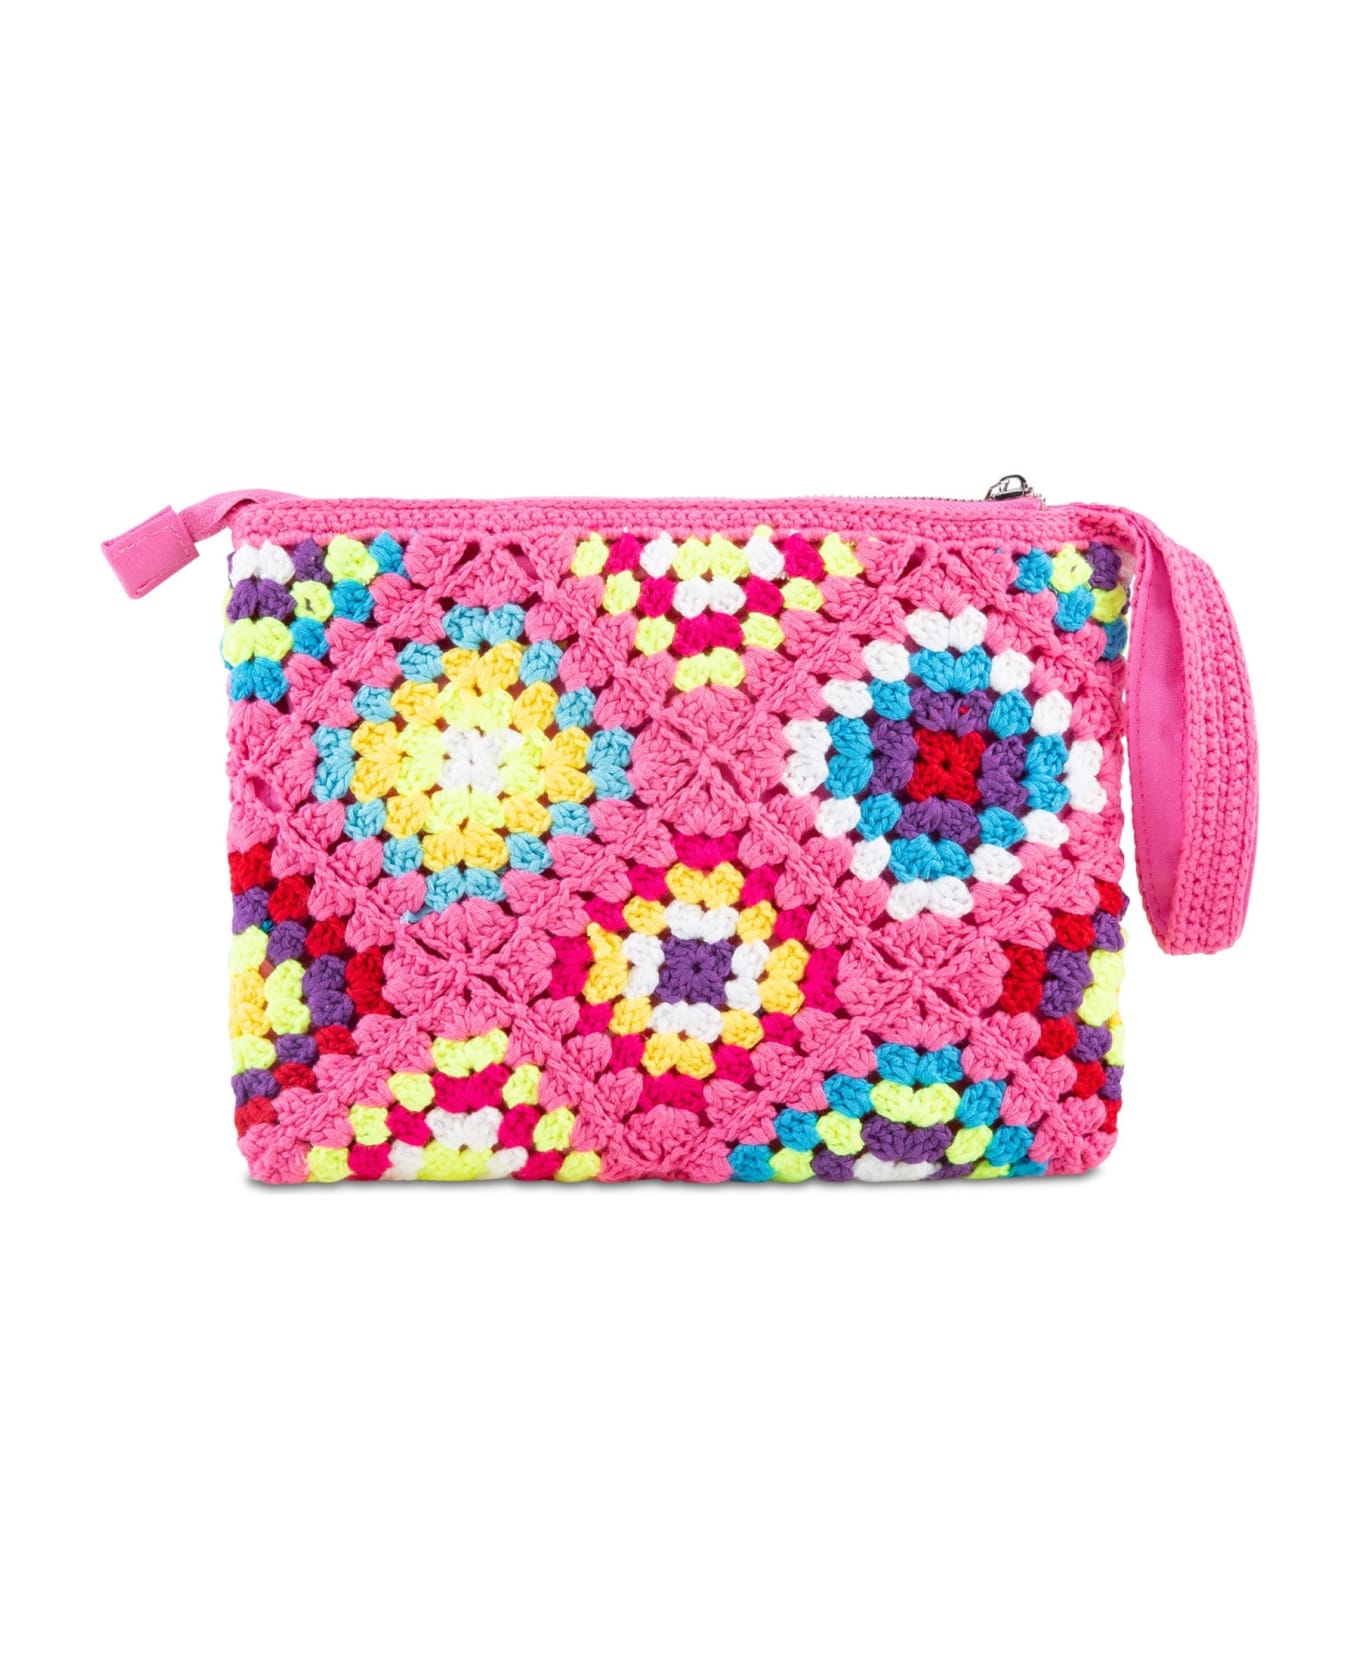 MC2 Saint Barth Parisienne Pink Crochet Pouch Bag With Saint Barth Embroidery - PINK トラベルバッグ